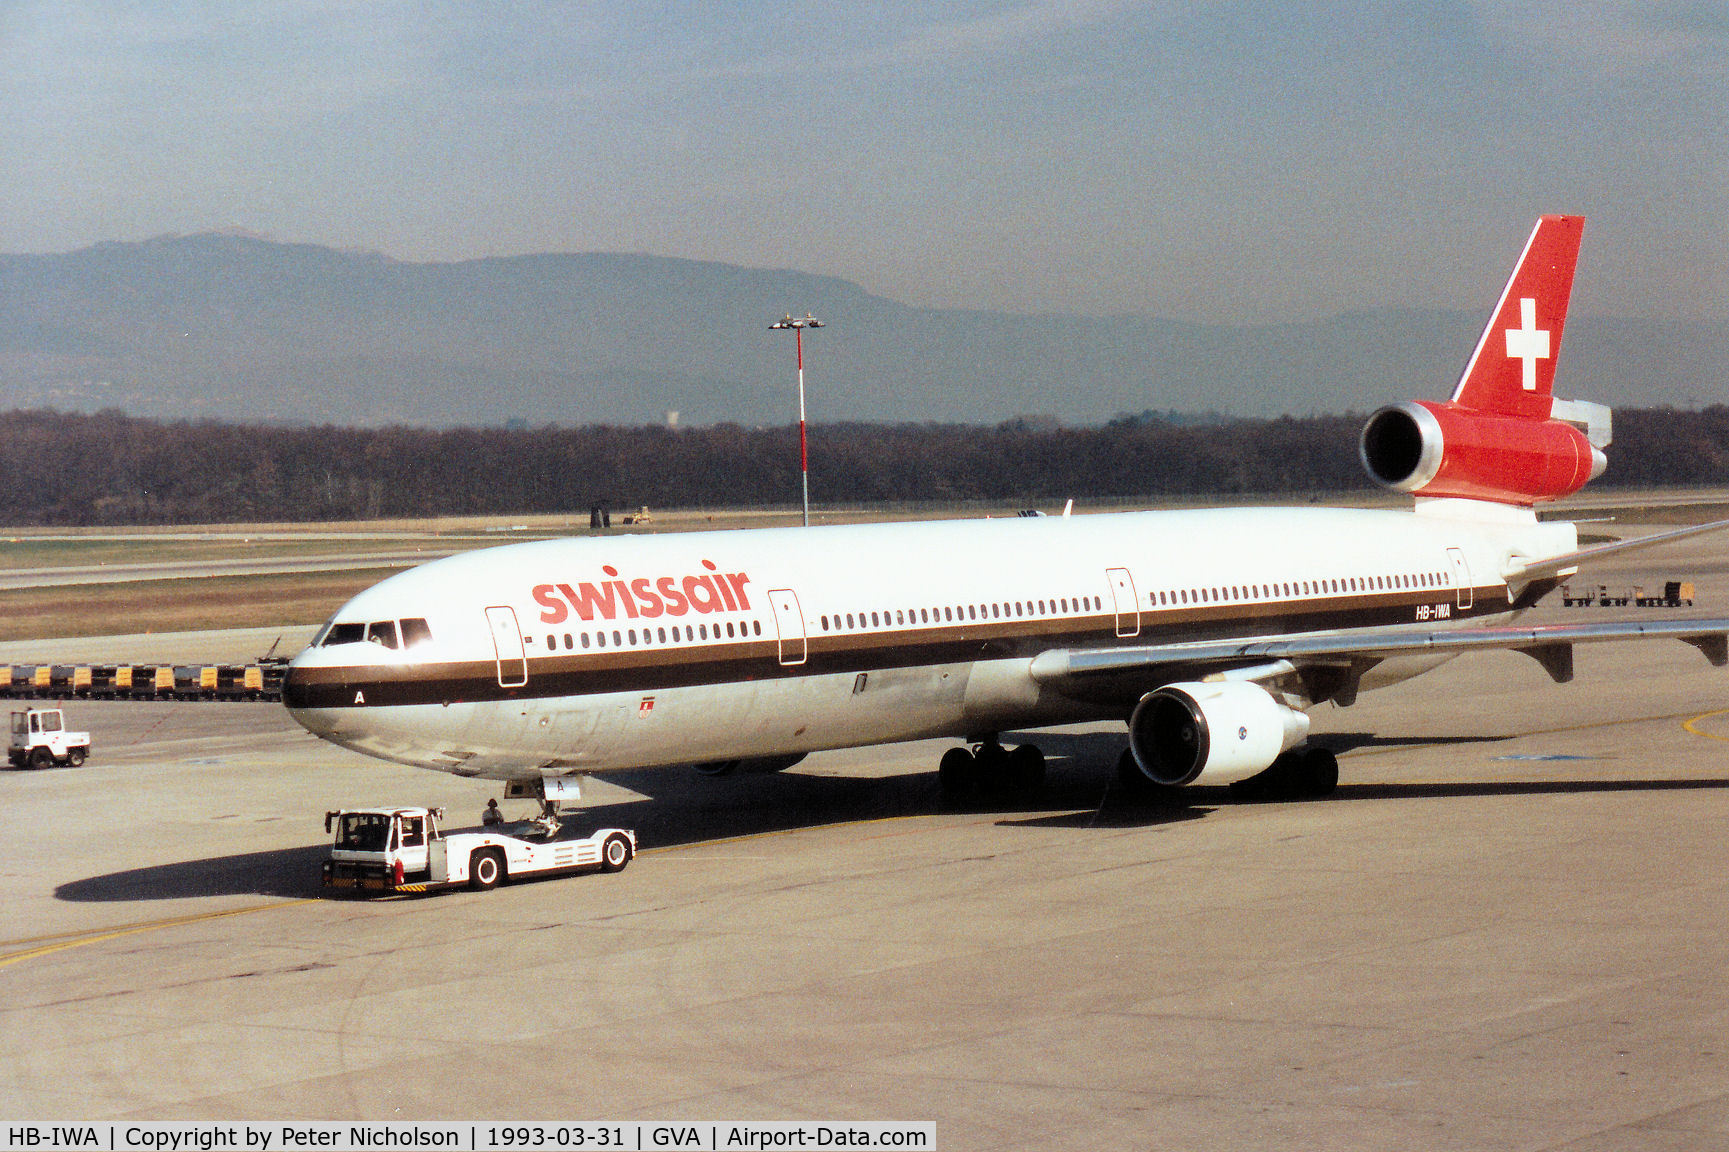 HB-IWA, 1990 McDonnell Douglas MD-11 C/N 48443, Swissair MD-11 being positioned at Geneva in March 1993.